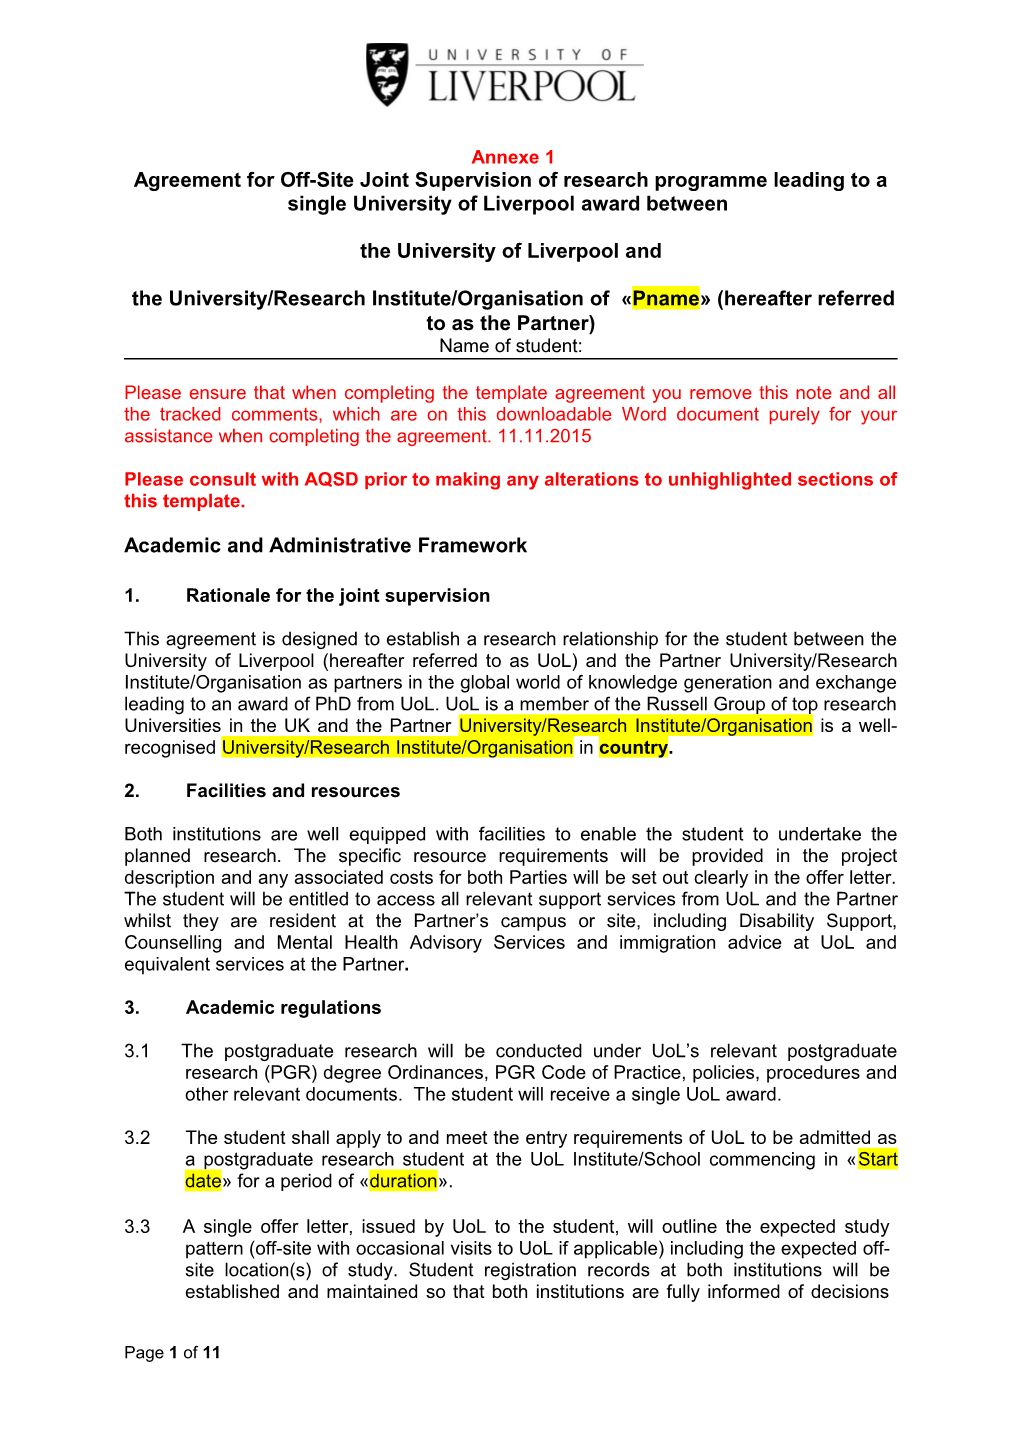 University of Liverpool Template Agreement for a Dual Collaborative Phd Degree with Ocean